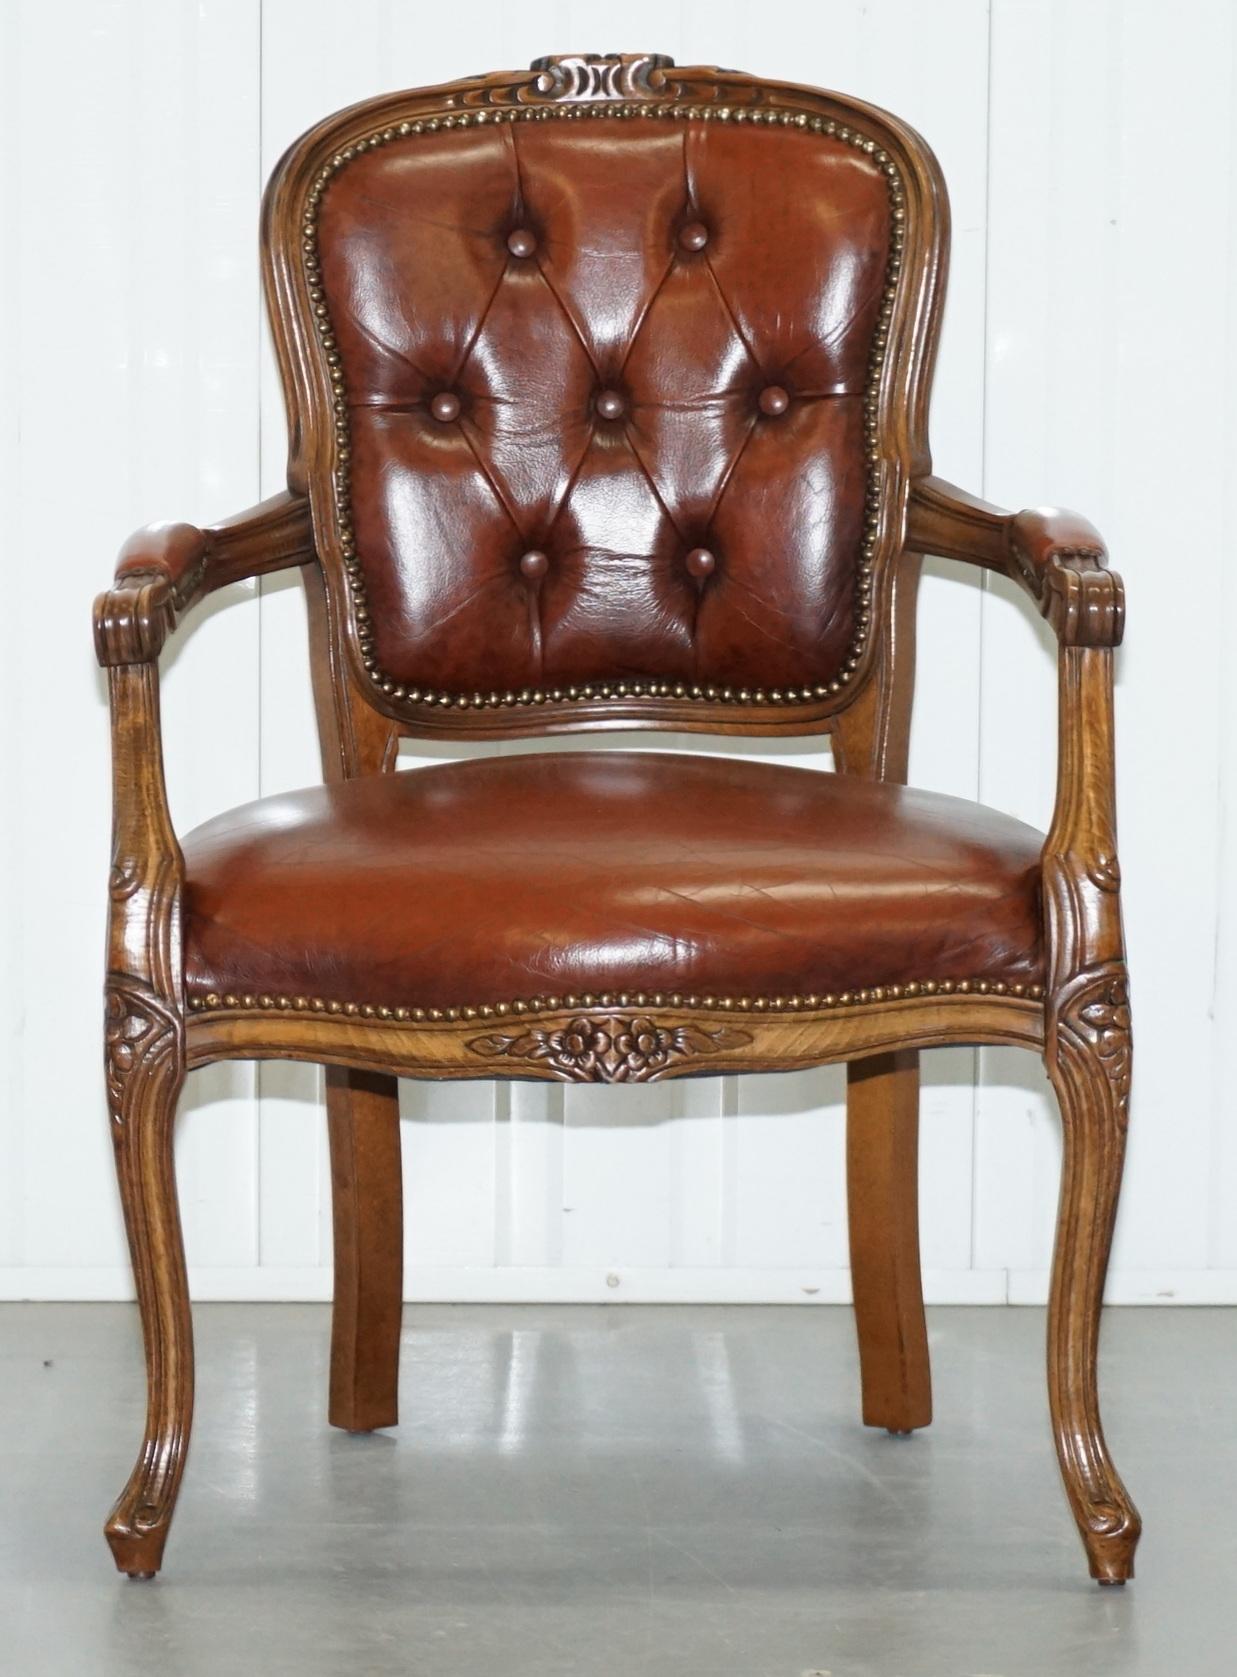 Wimbledon-Furniture is delighted to offer for sale this very nice vintage French Louis XVII style brown leather armchair with Chesterfield buttoning

Please note the delivery fee listed is just a guide, it covers within the M25 only, for an